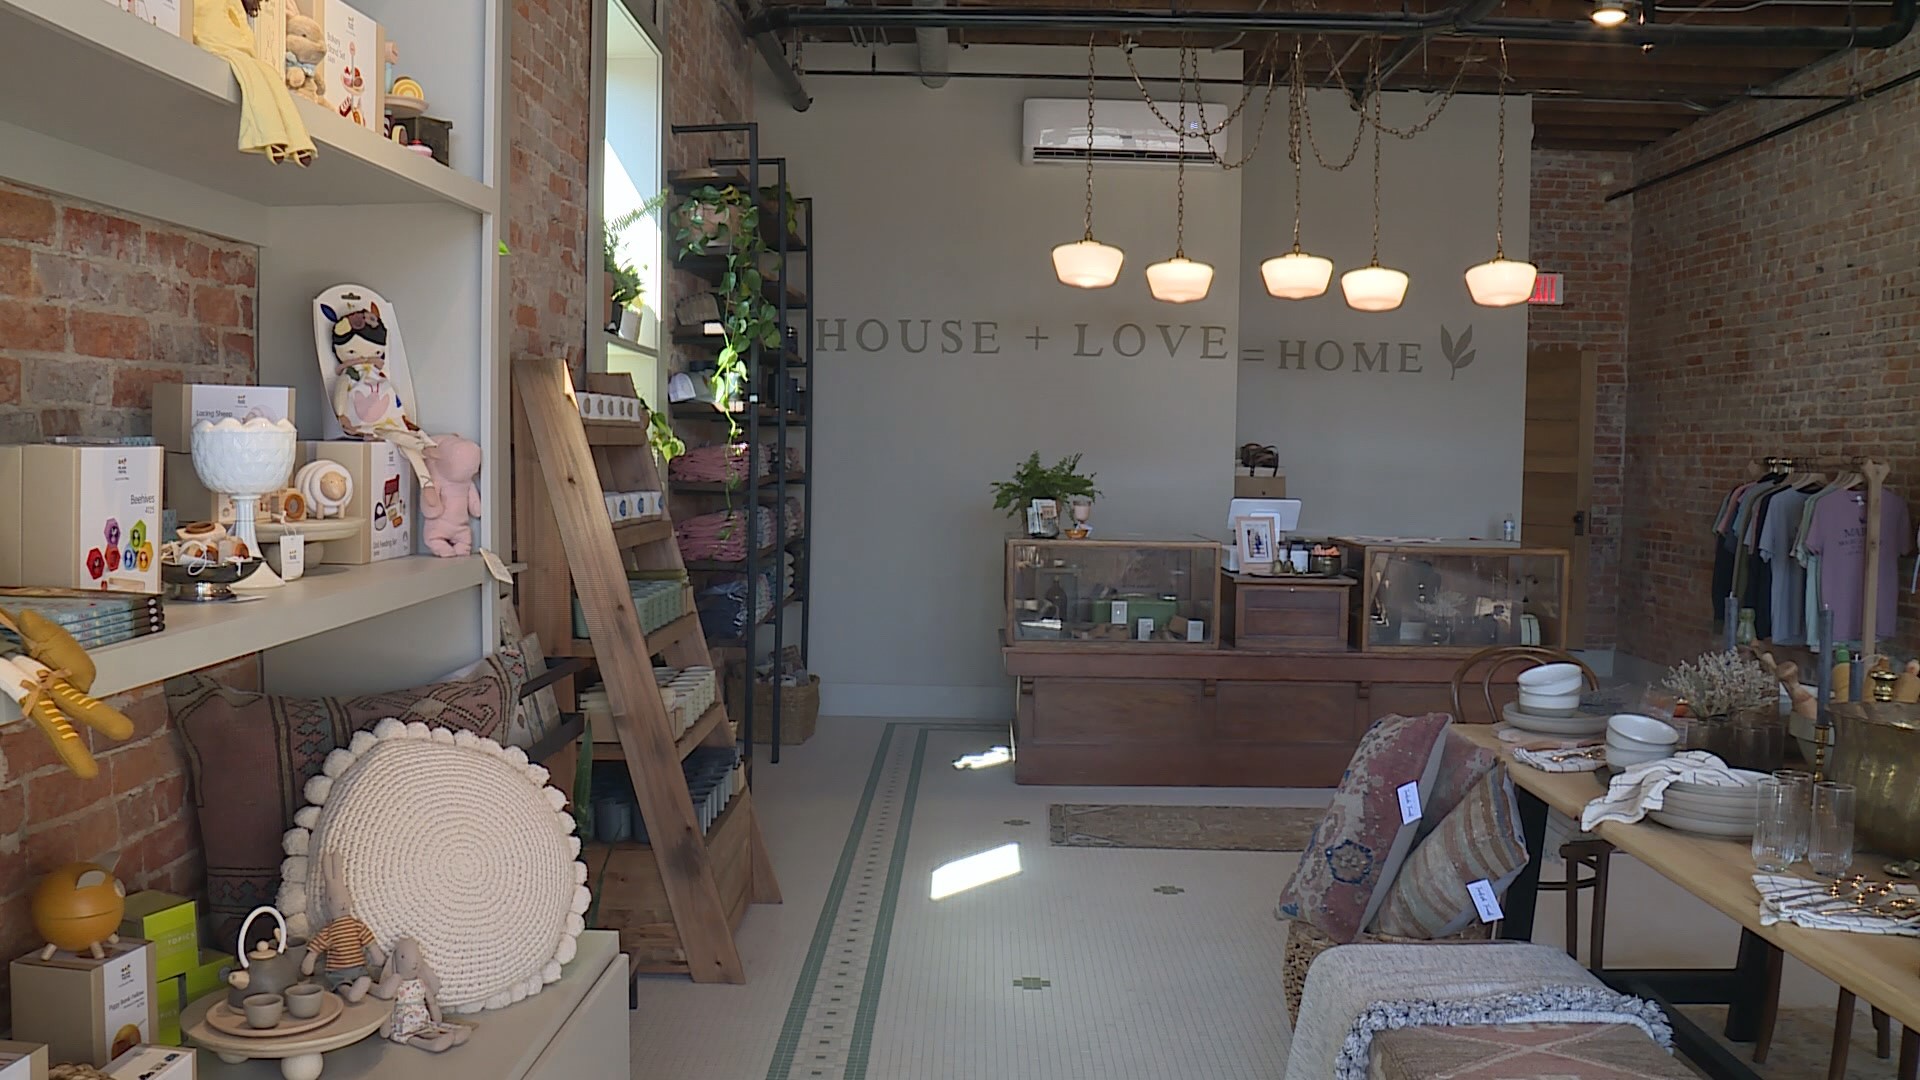 "Welcoming and warm"- Owners Dave and Jenny say they opened the store to highlight the artism and unique home items similar to those used in their projects.